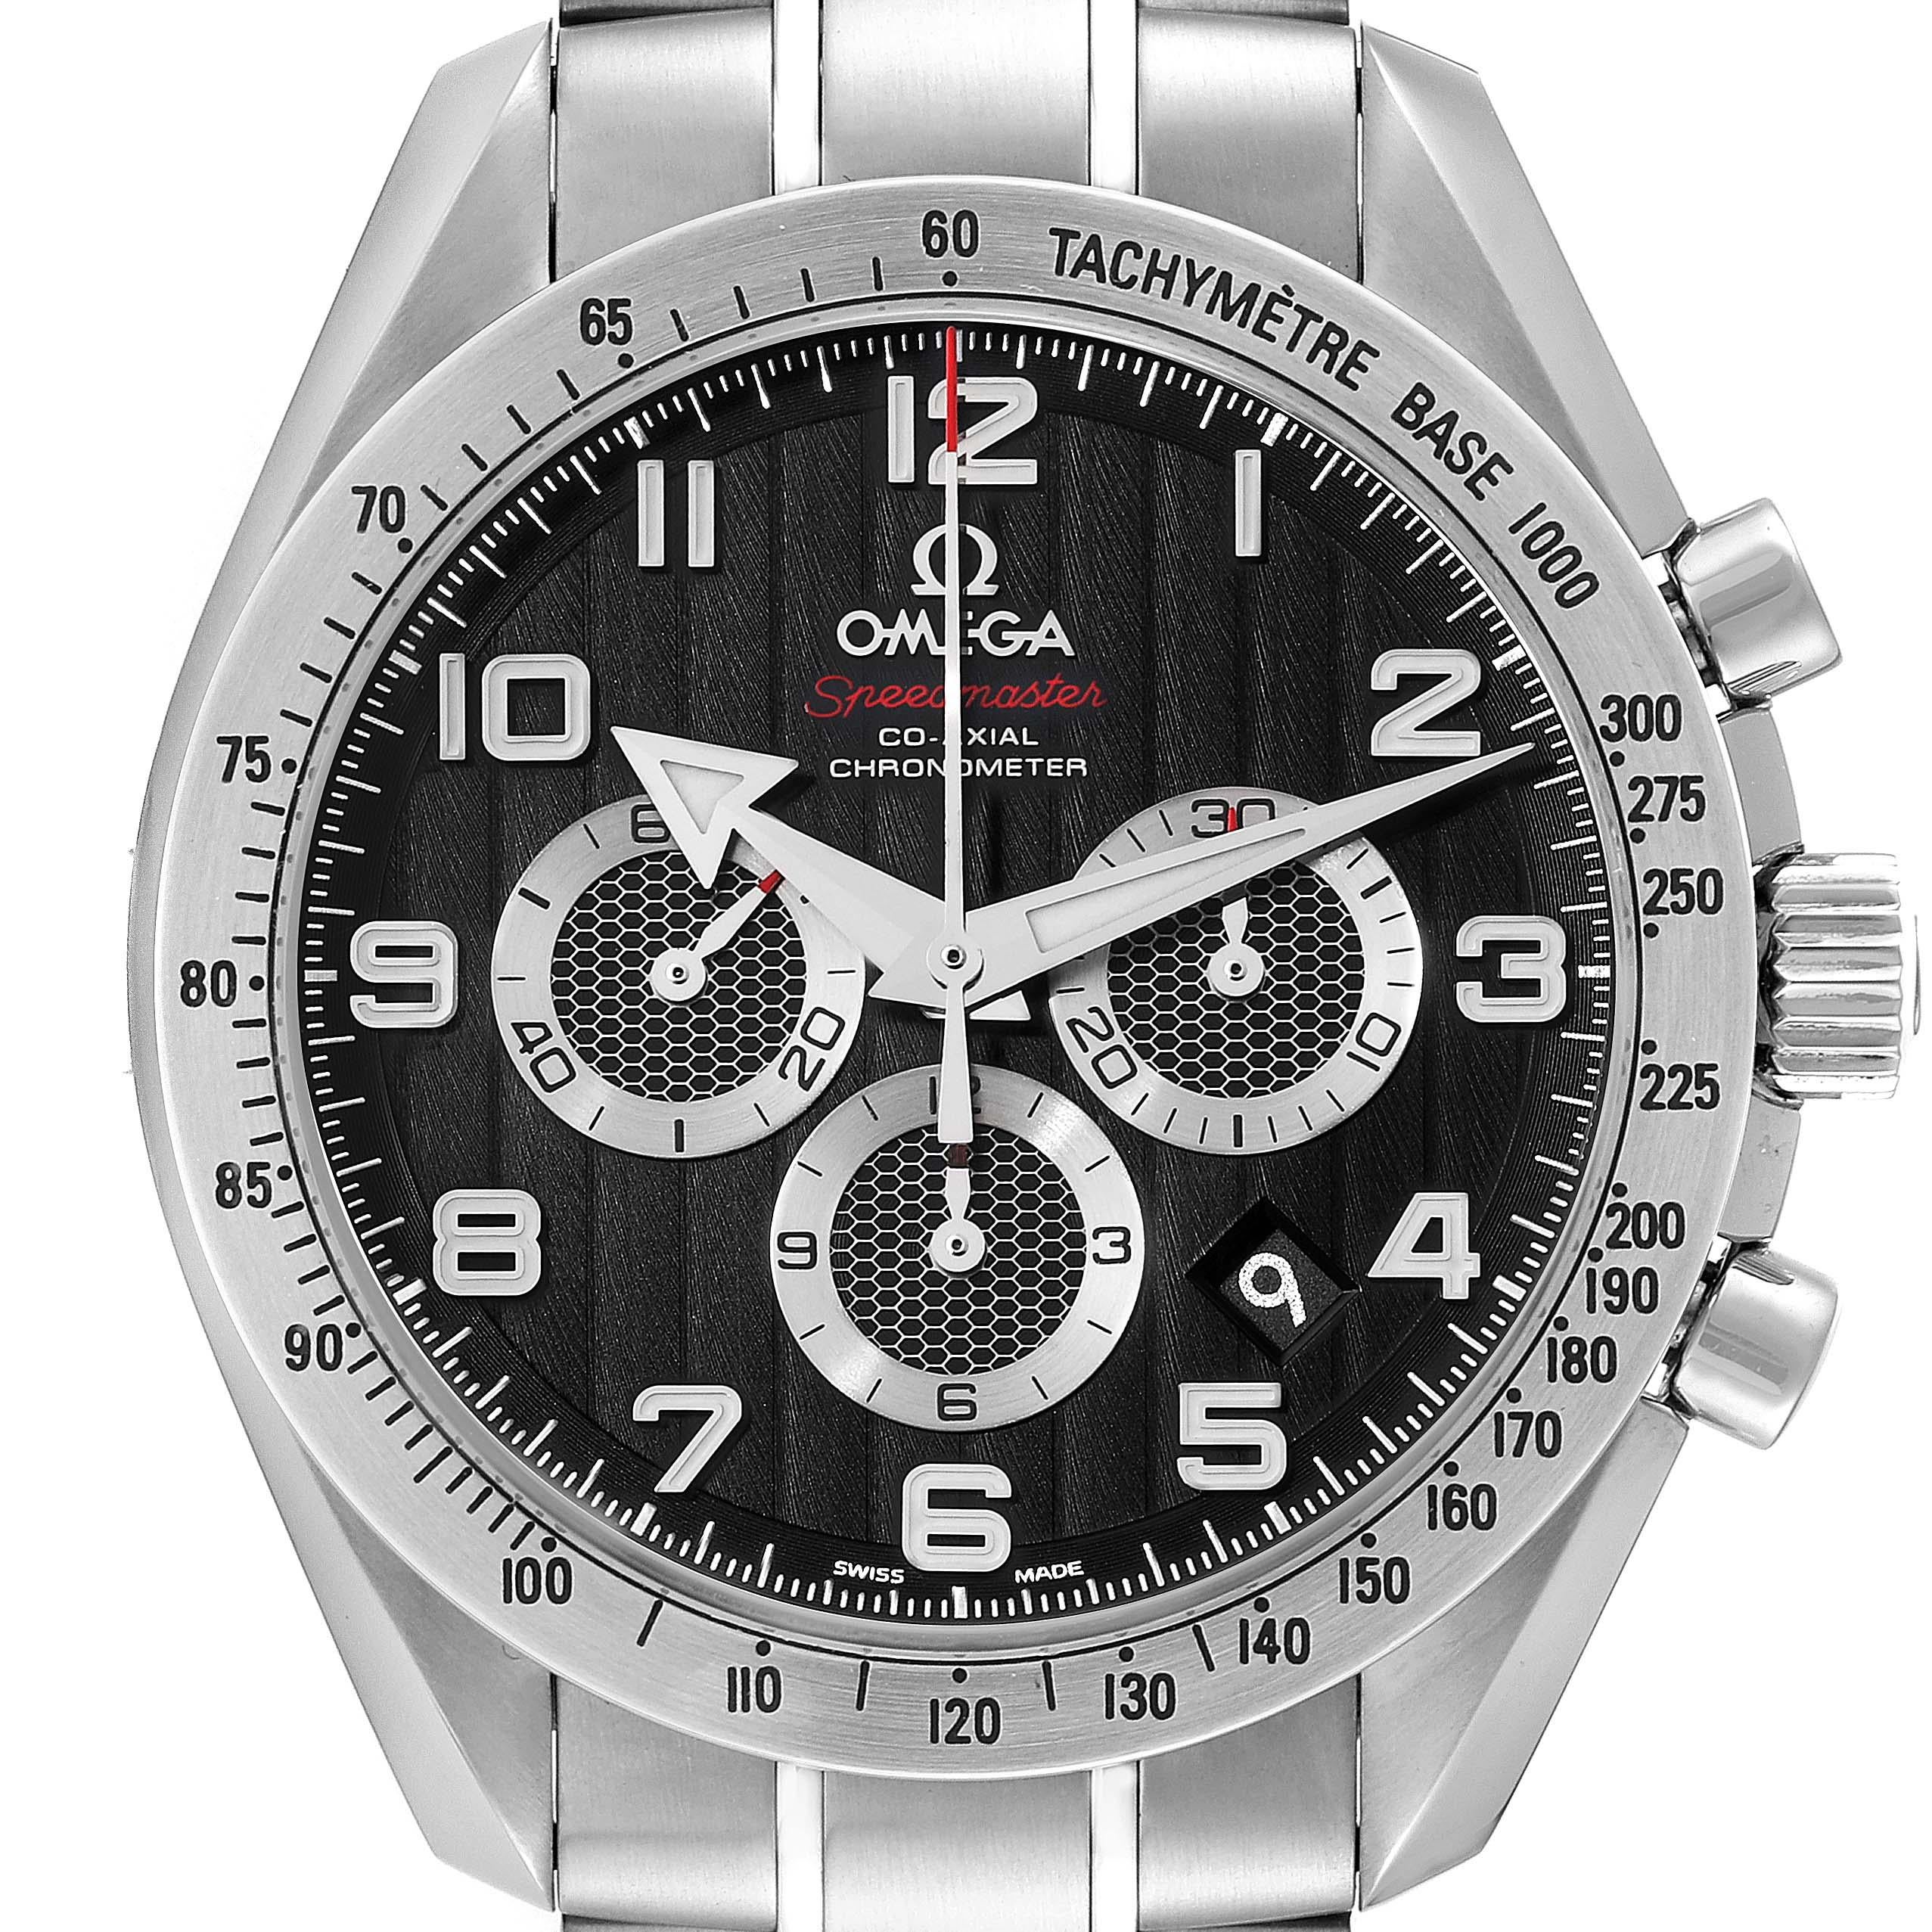 Omega Speedmaster Broad Arrow Steel Mens Watch 321.10.44.50.01.001 Box Card. COSC-certified Omega automatic chronograph movement. Stainless steel round case 44.25 mm in diameter with polished beveled edges, pushers, and crown. Transparent exhibition